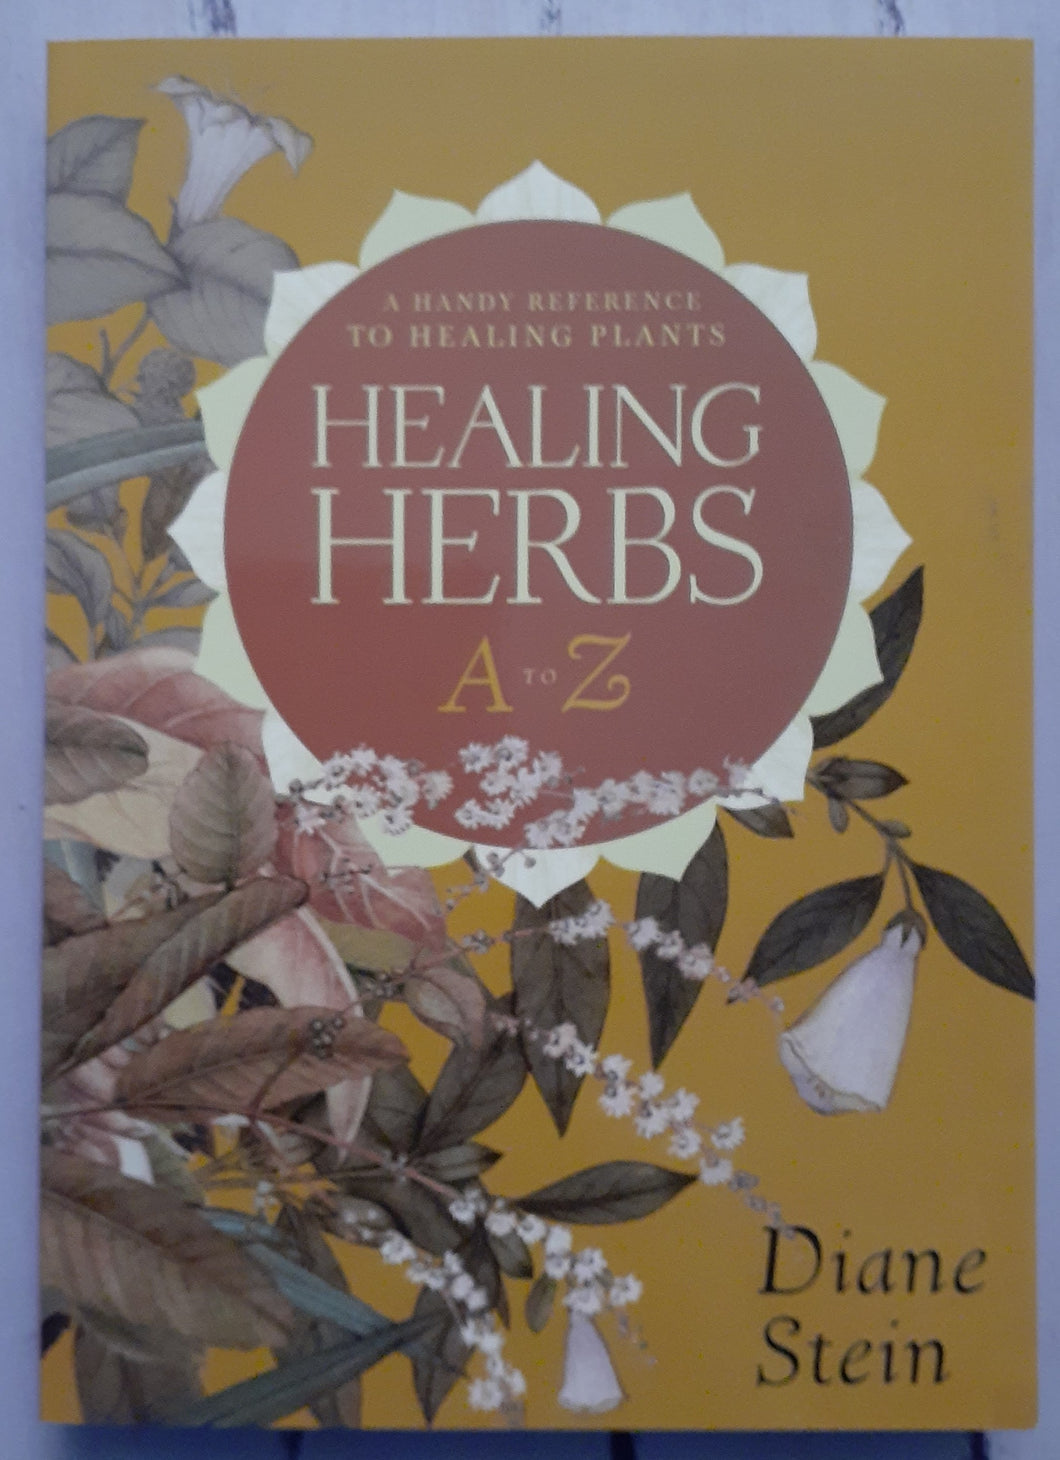 Healing Herbs A to Z - A Handy Reference to Healing Plants